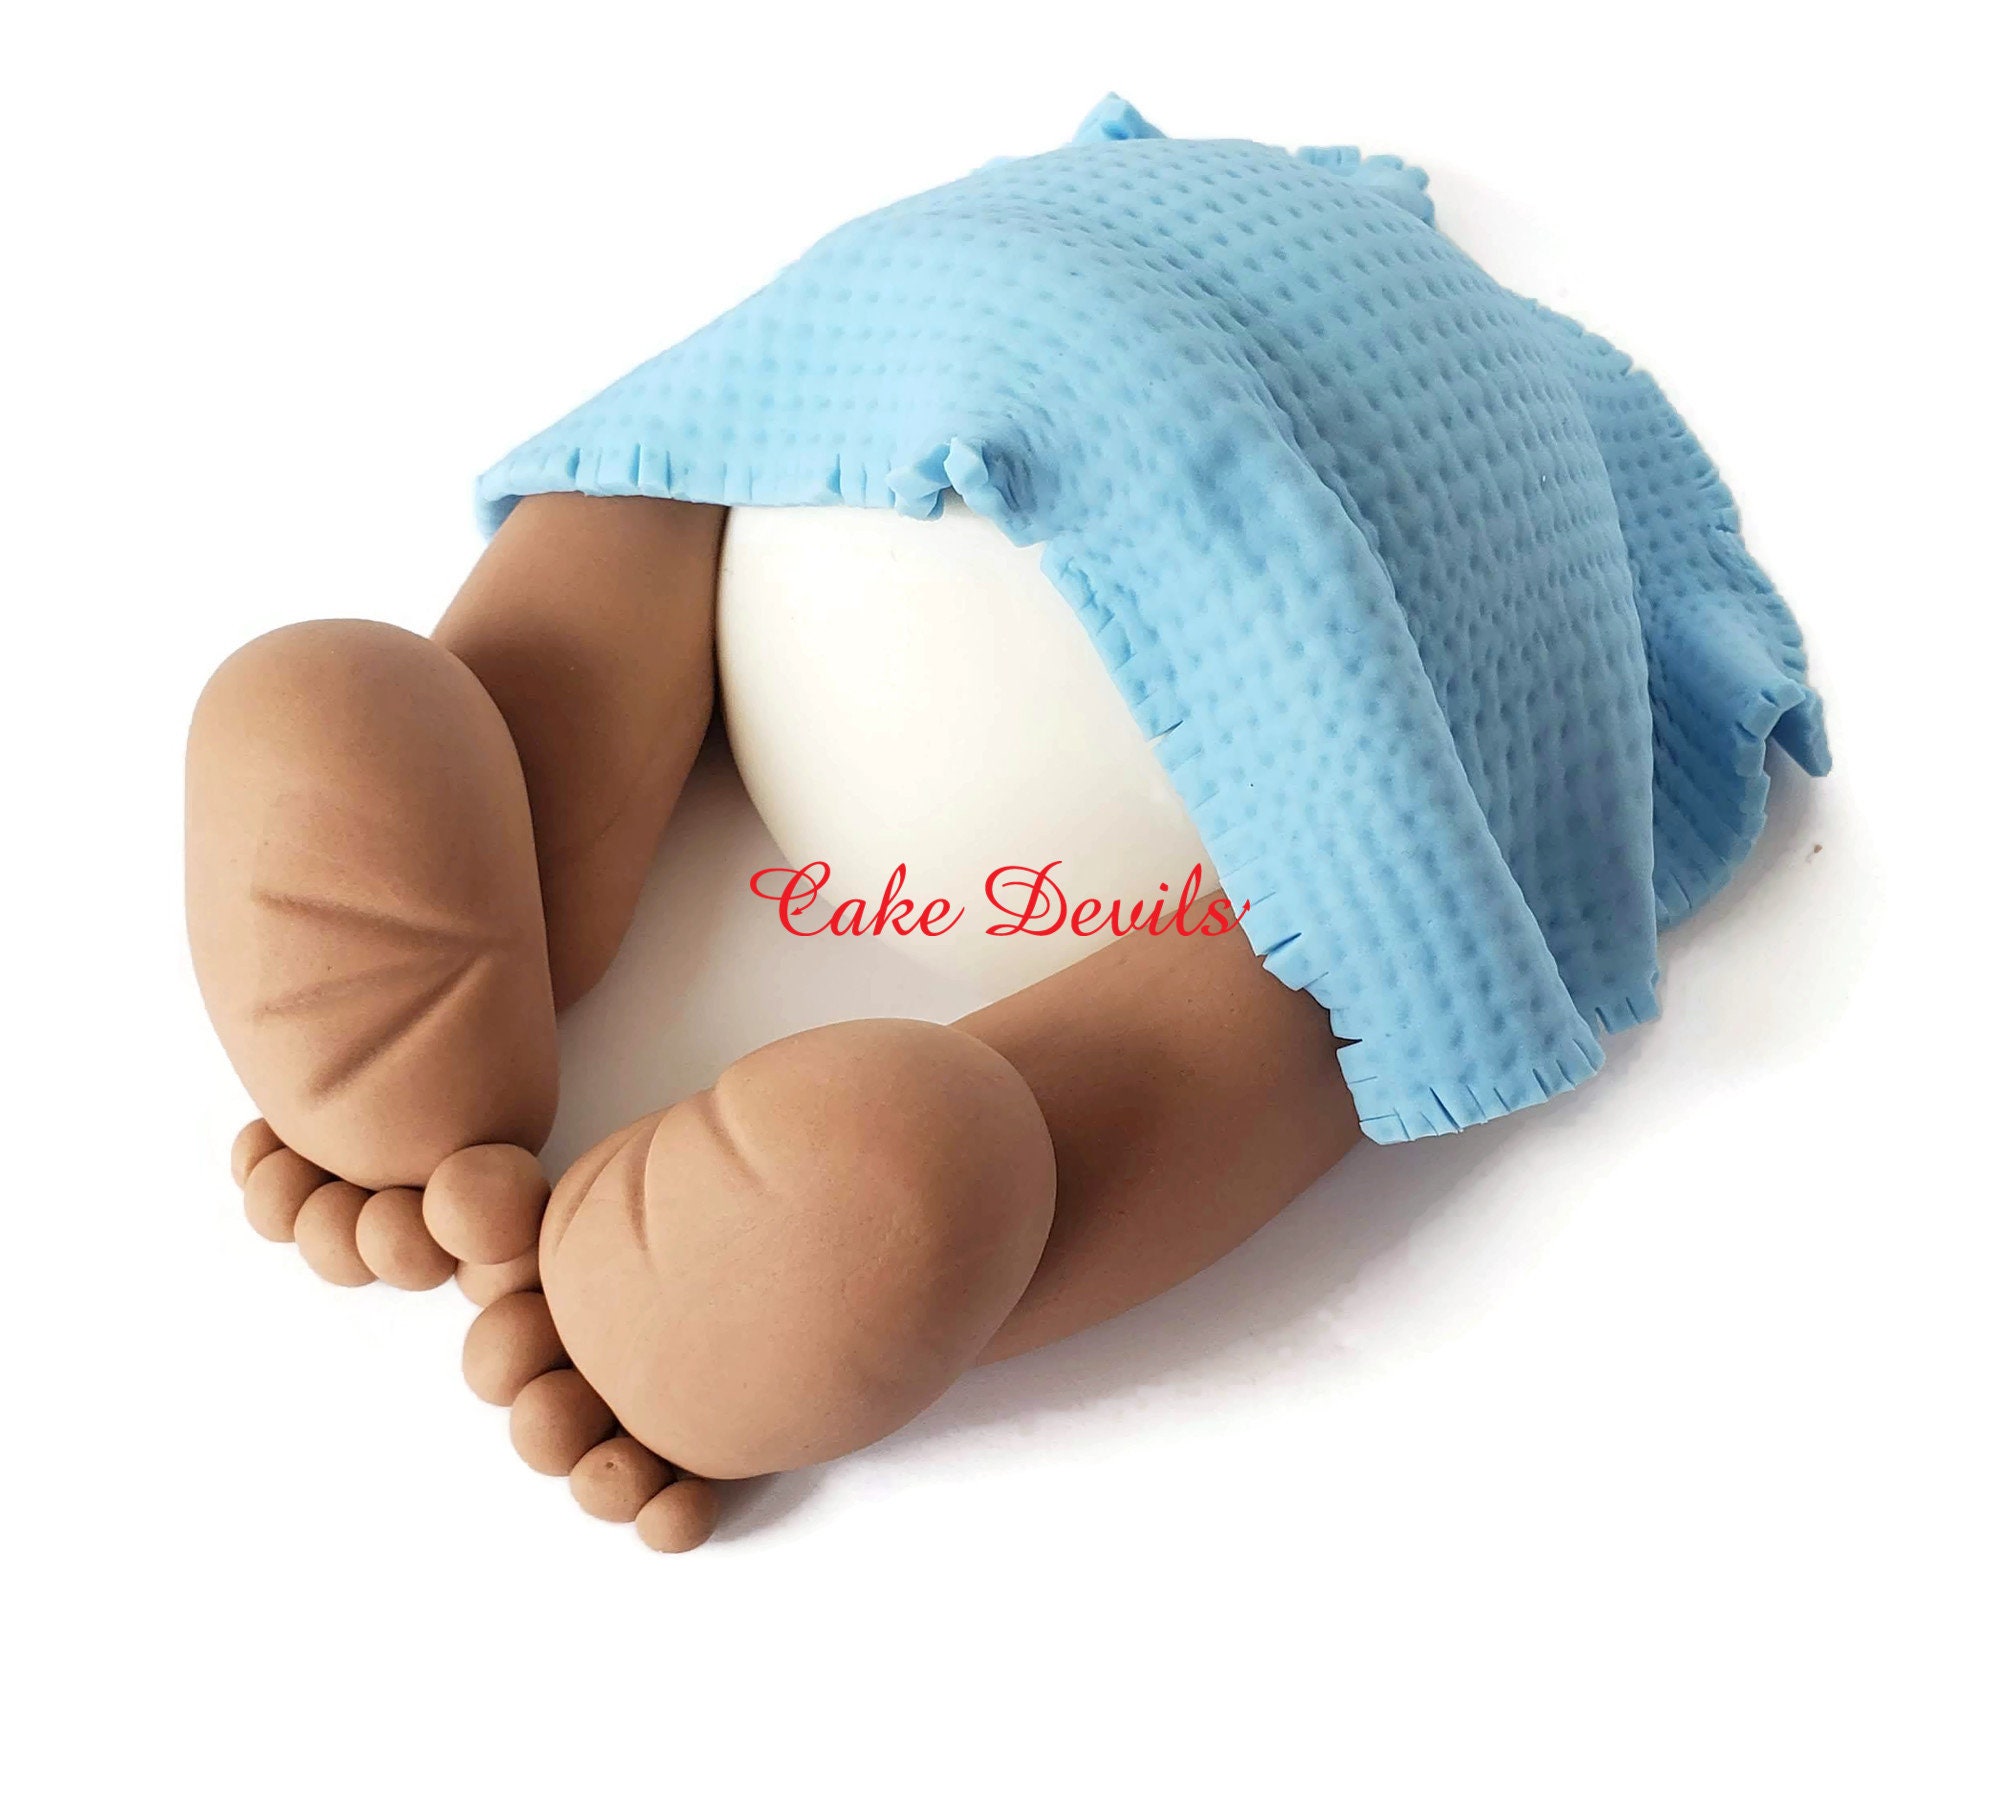 Baby Boy Baby Shower Cake Decorations Baby Shower Cake Decorations Baby Girl Handmade Edible Fondant Baby Butt Baby Shower Cake Topper